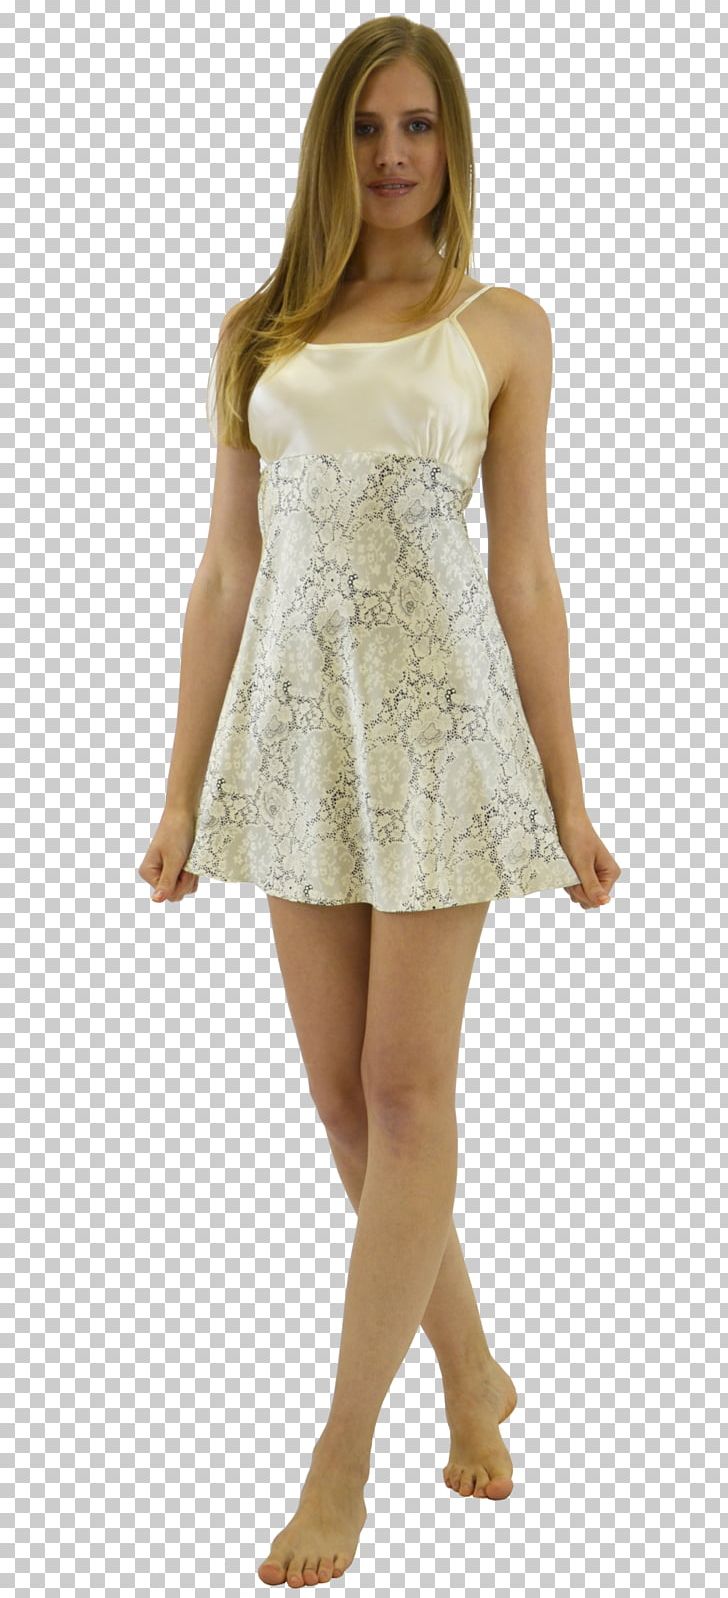 Slip Amazon.com Cocktail Dress Clothing PNG, Clipart, Abdomen, Amazoncom, Clothing, Cocktail Dress, Costume Free PNG Download